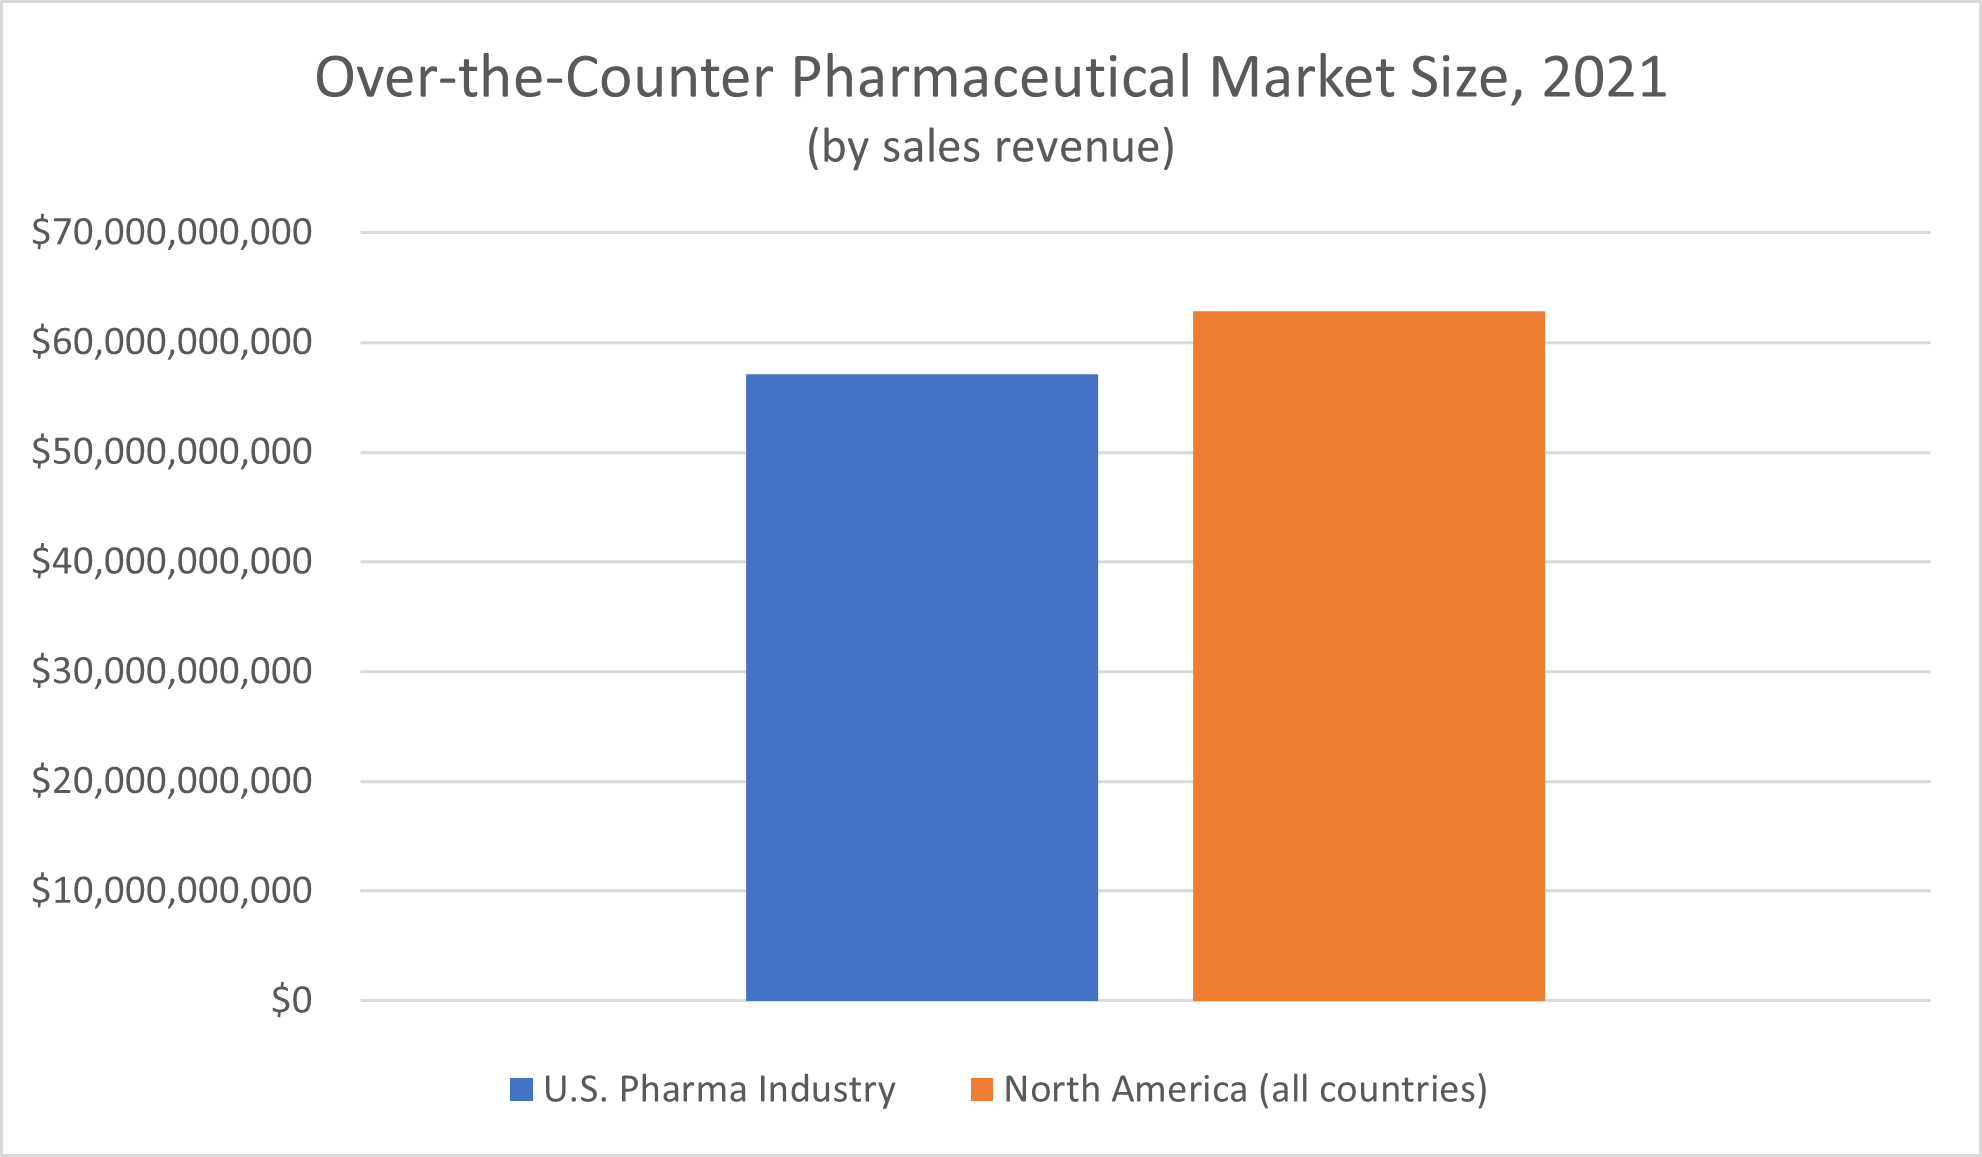 Over-the-Counter Pharmaceutical Market Size chart